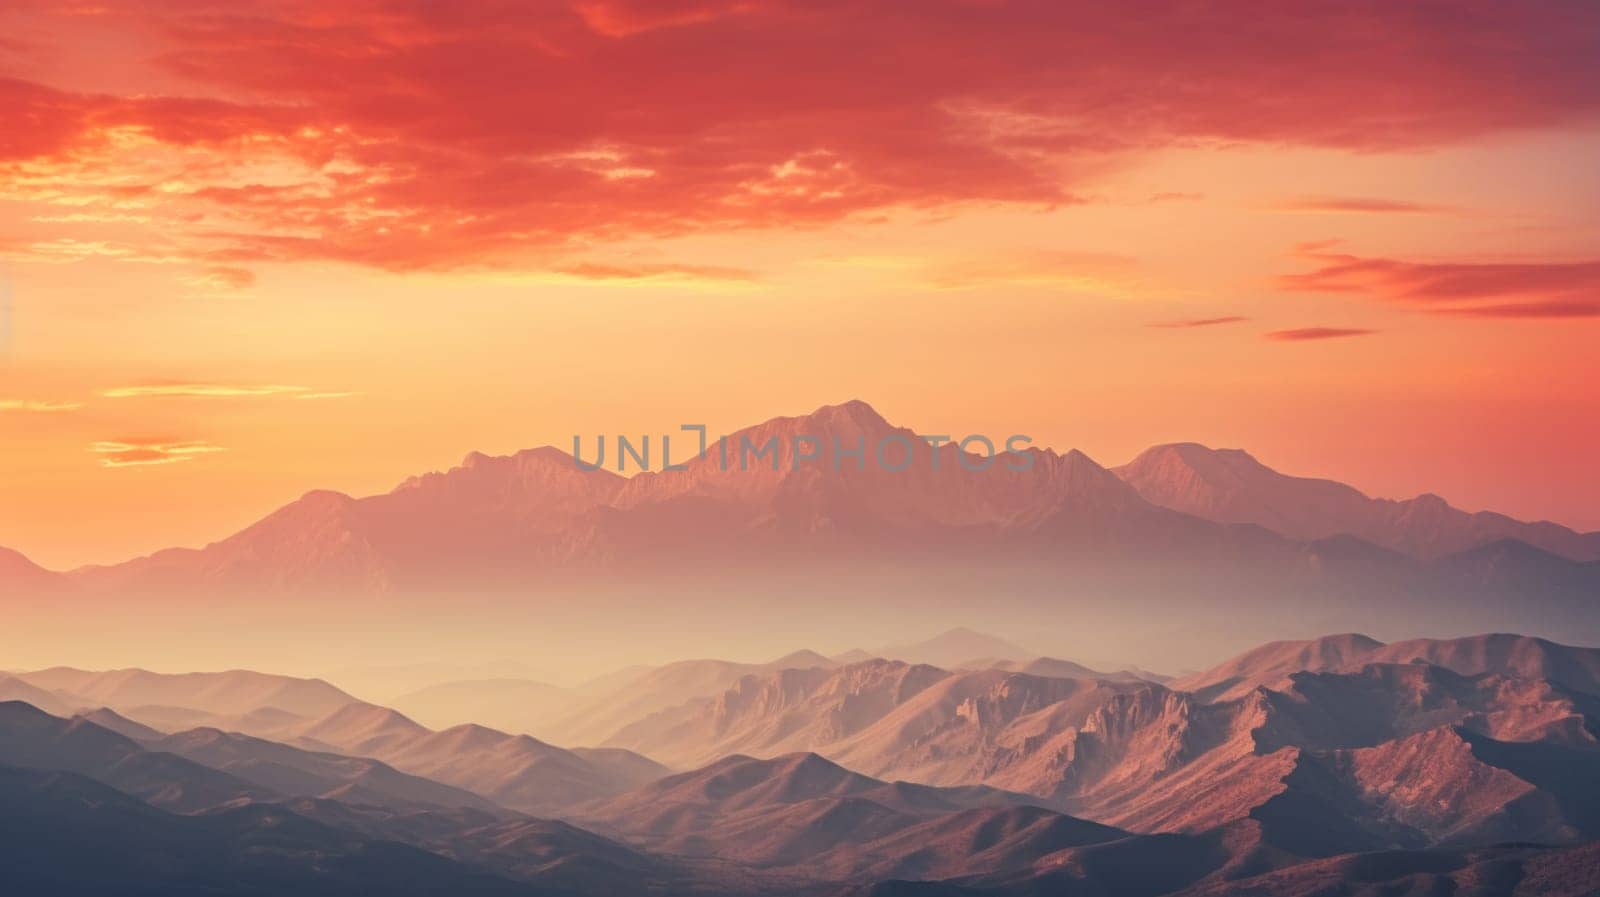 A view of a mountain range at sunset